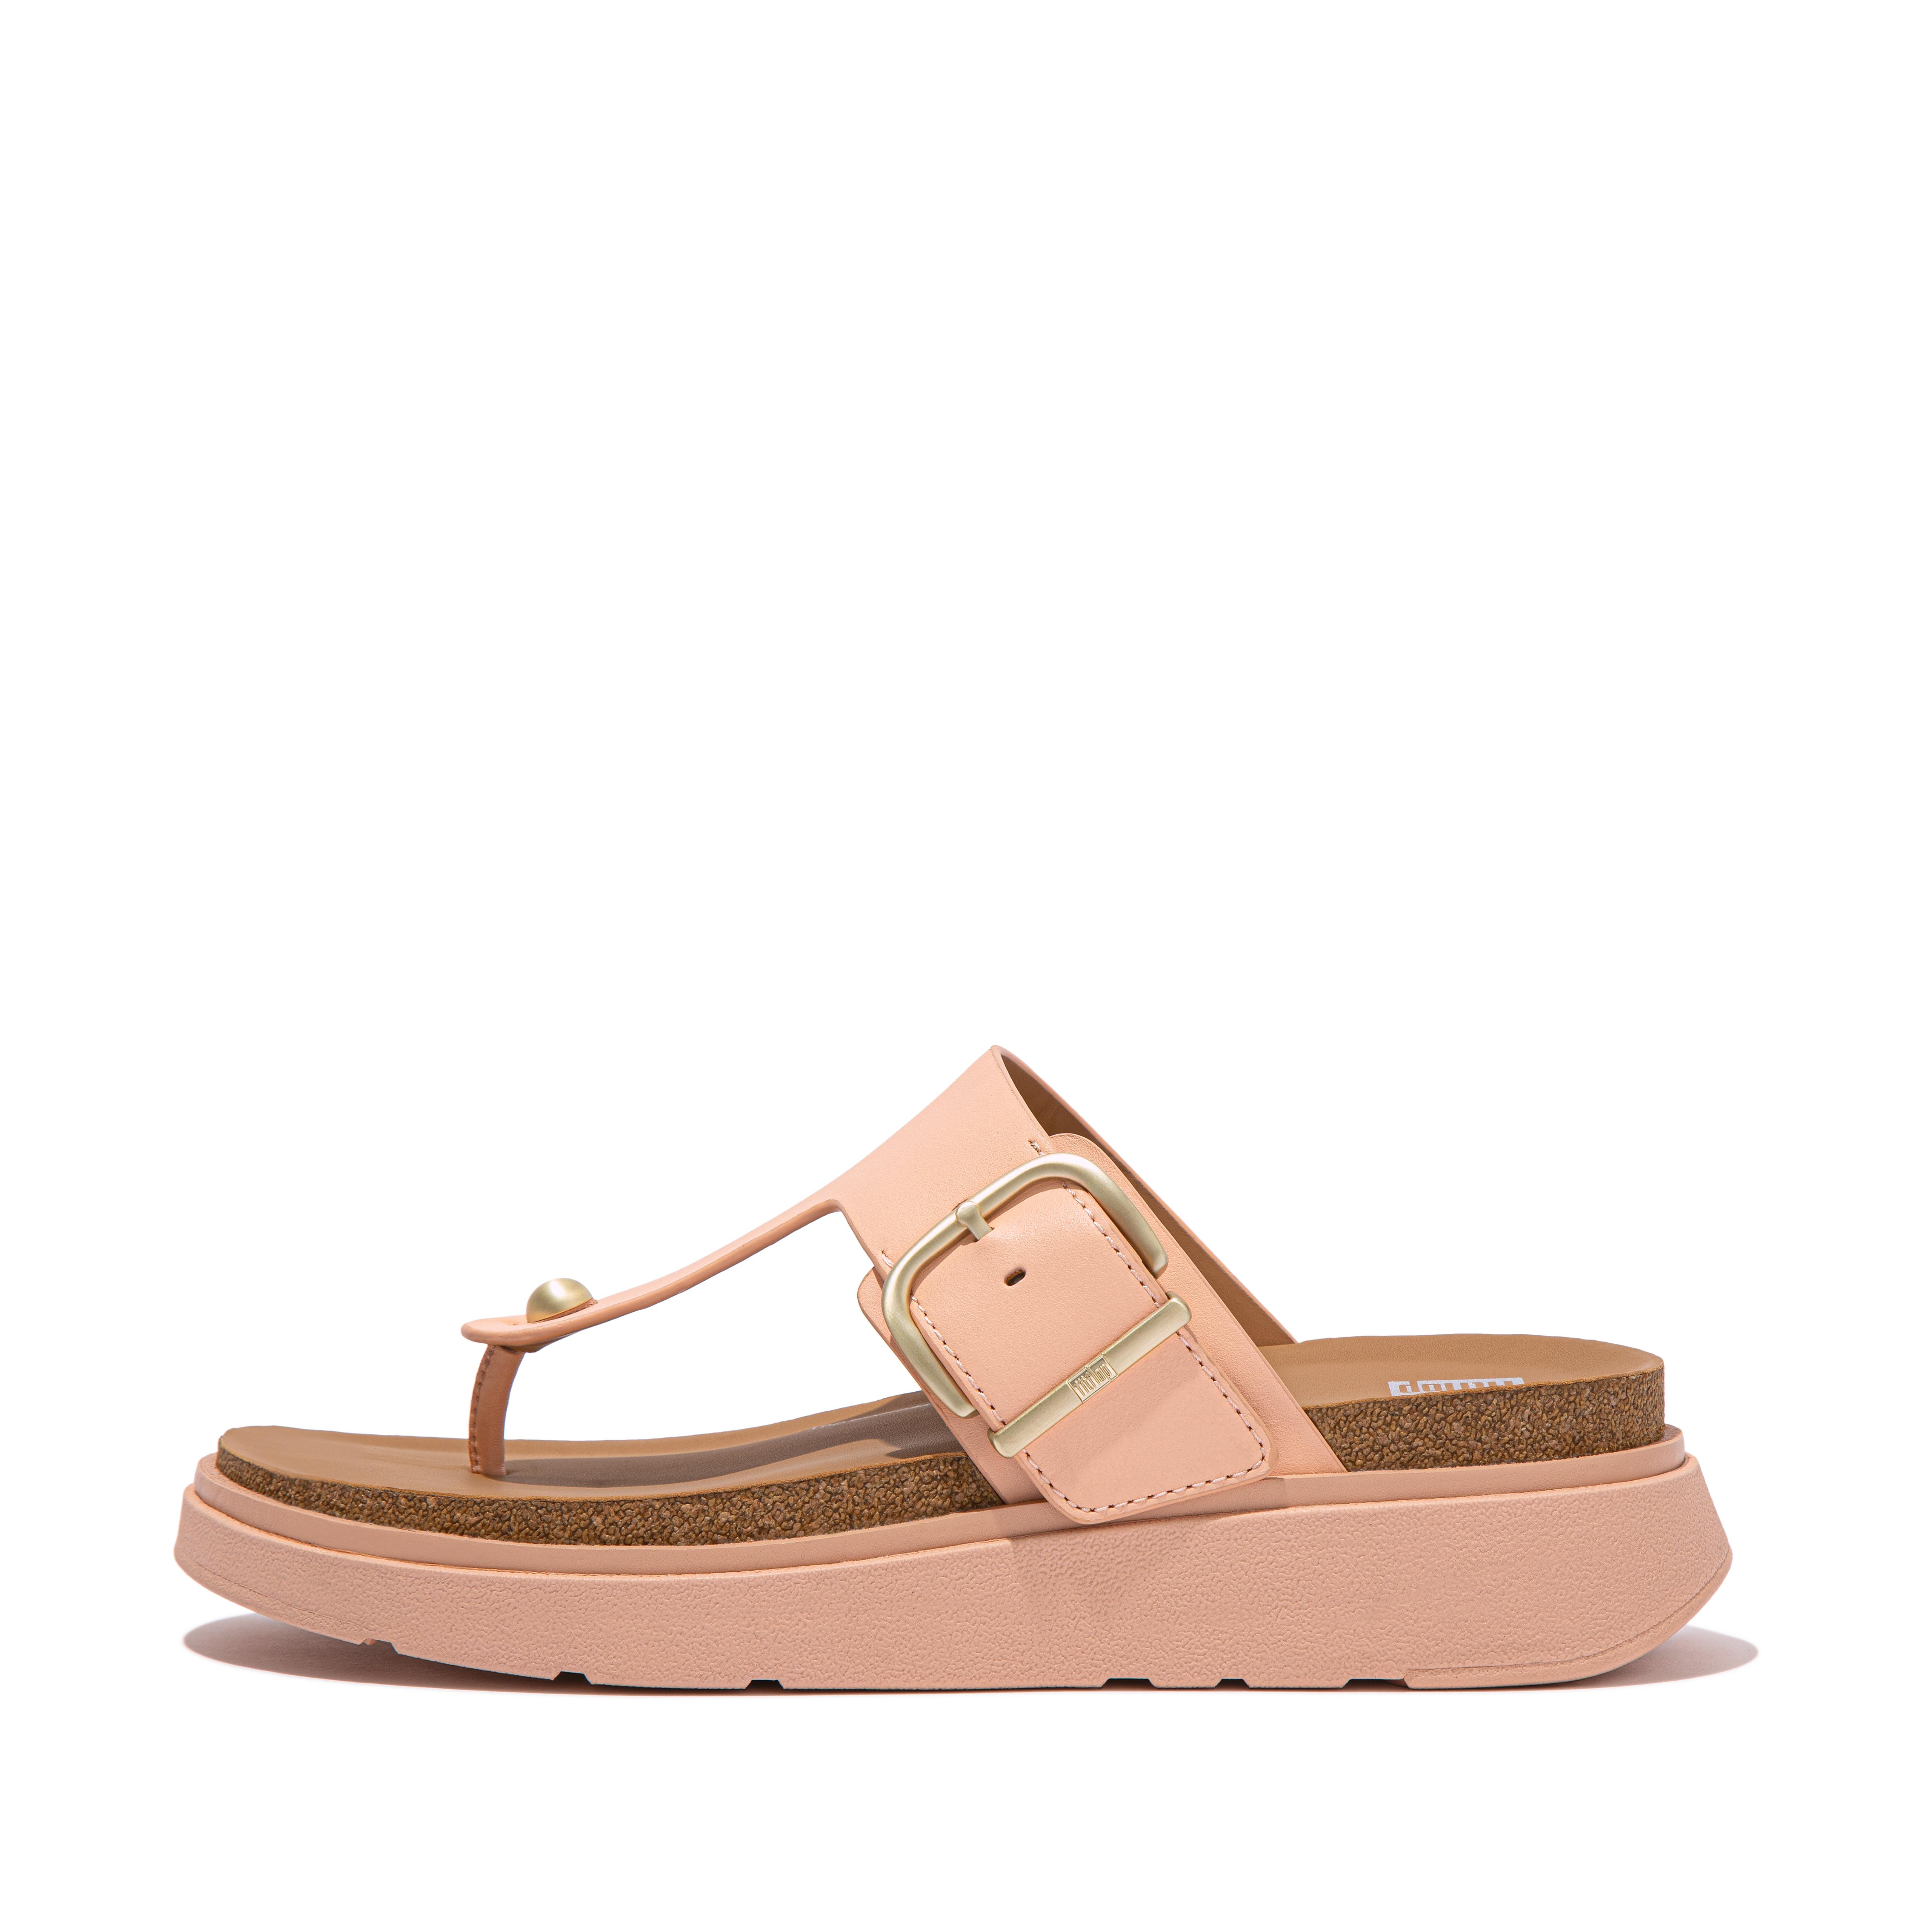 Fitflop Buckle Leather Toe-Post Sandals,Blushy